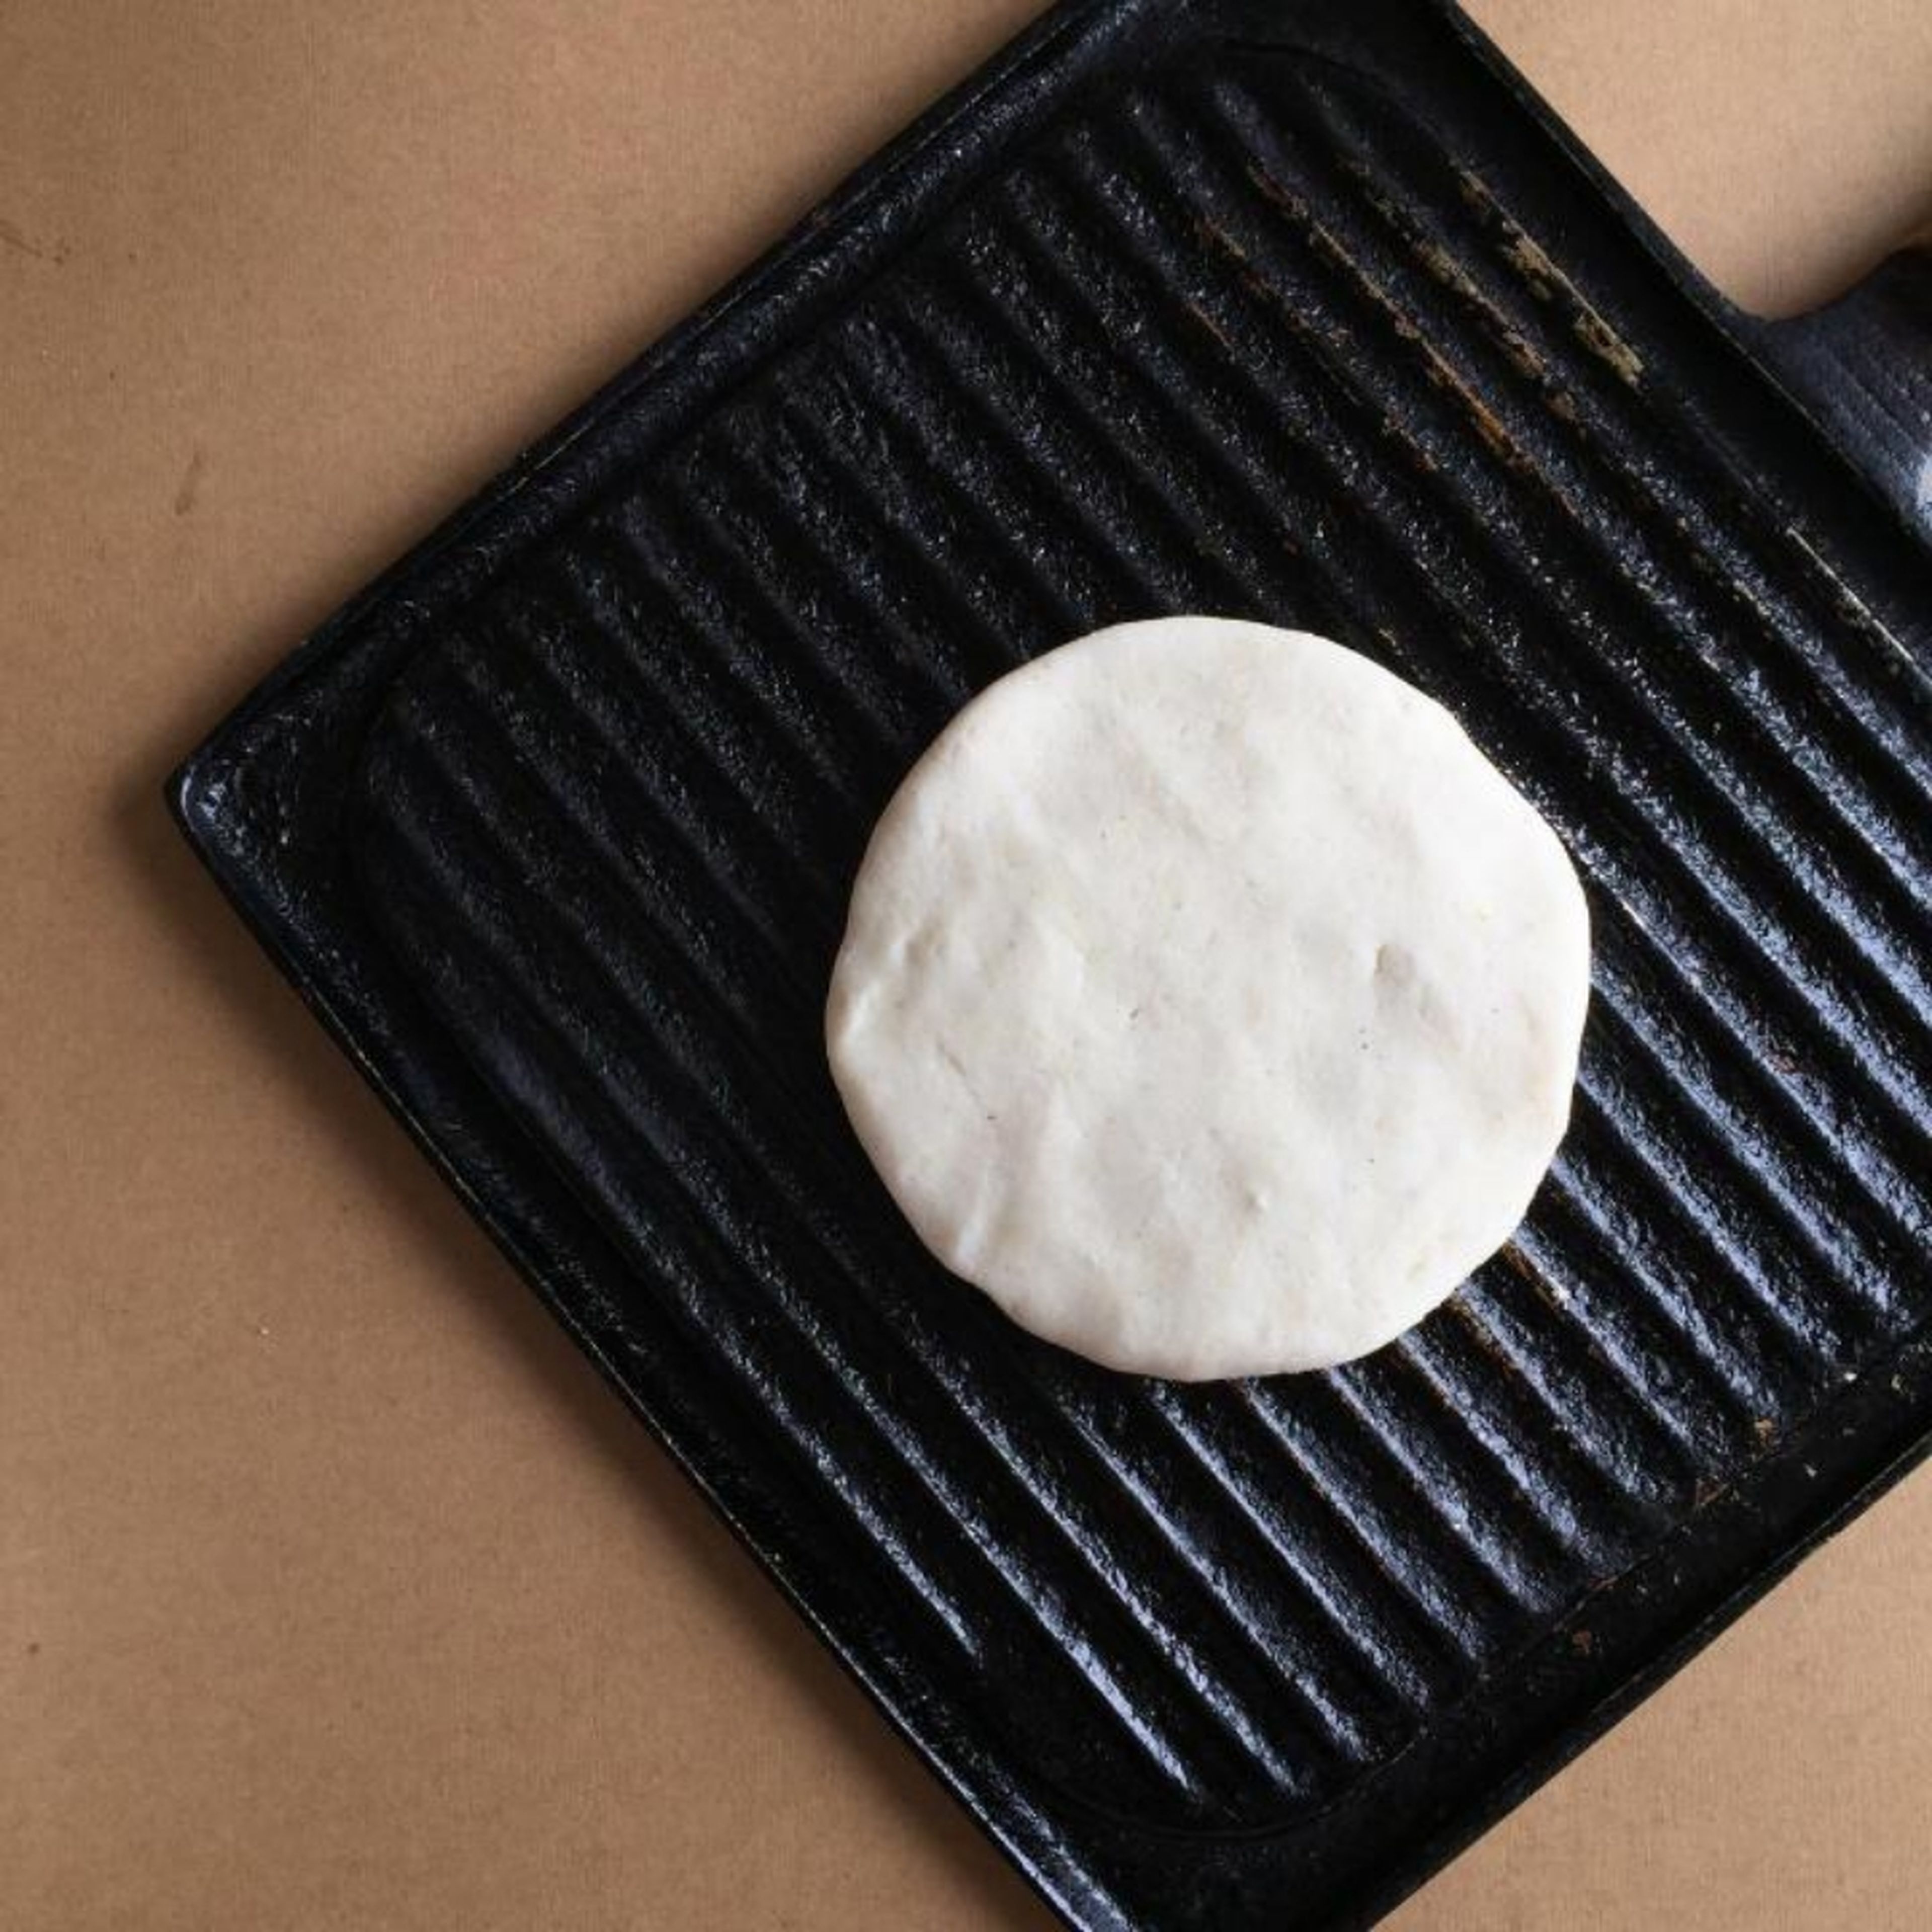 Lightly oil a large iron or grill pan over medium heat. Let the skillet get hot before adding the arepa dough. In batches, add the formed arepas disks to the skillet. Cook each arepa about 4-6 minutes on each side, or until they start to get light brown spots.